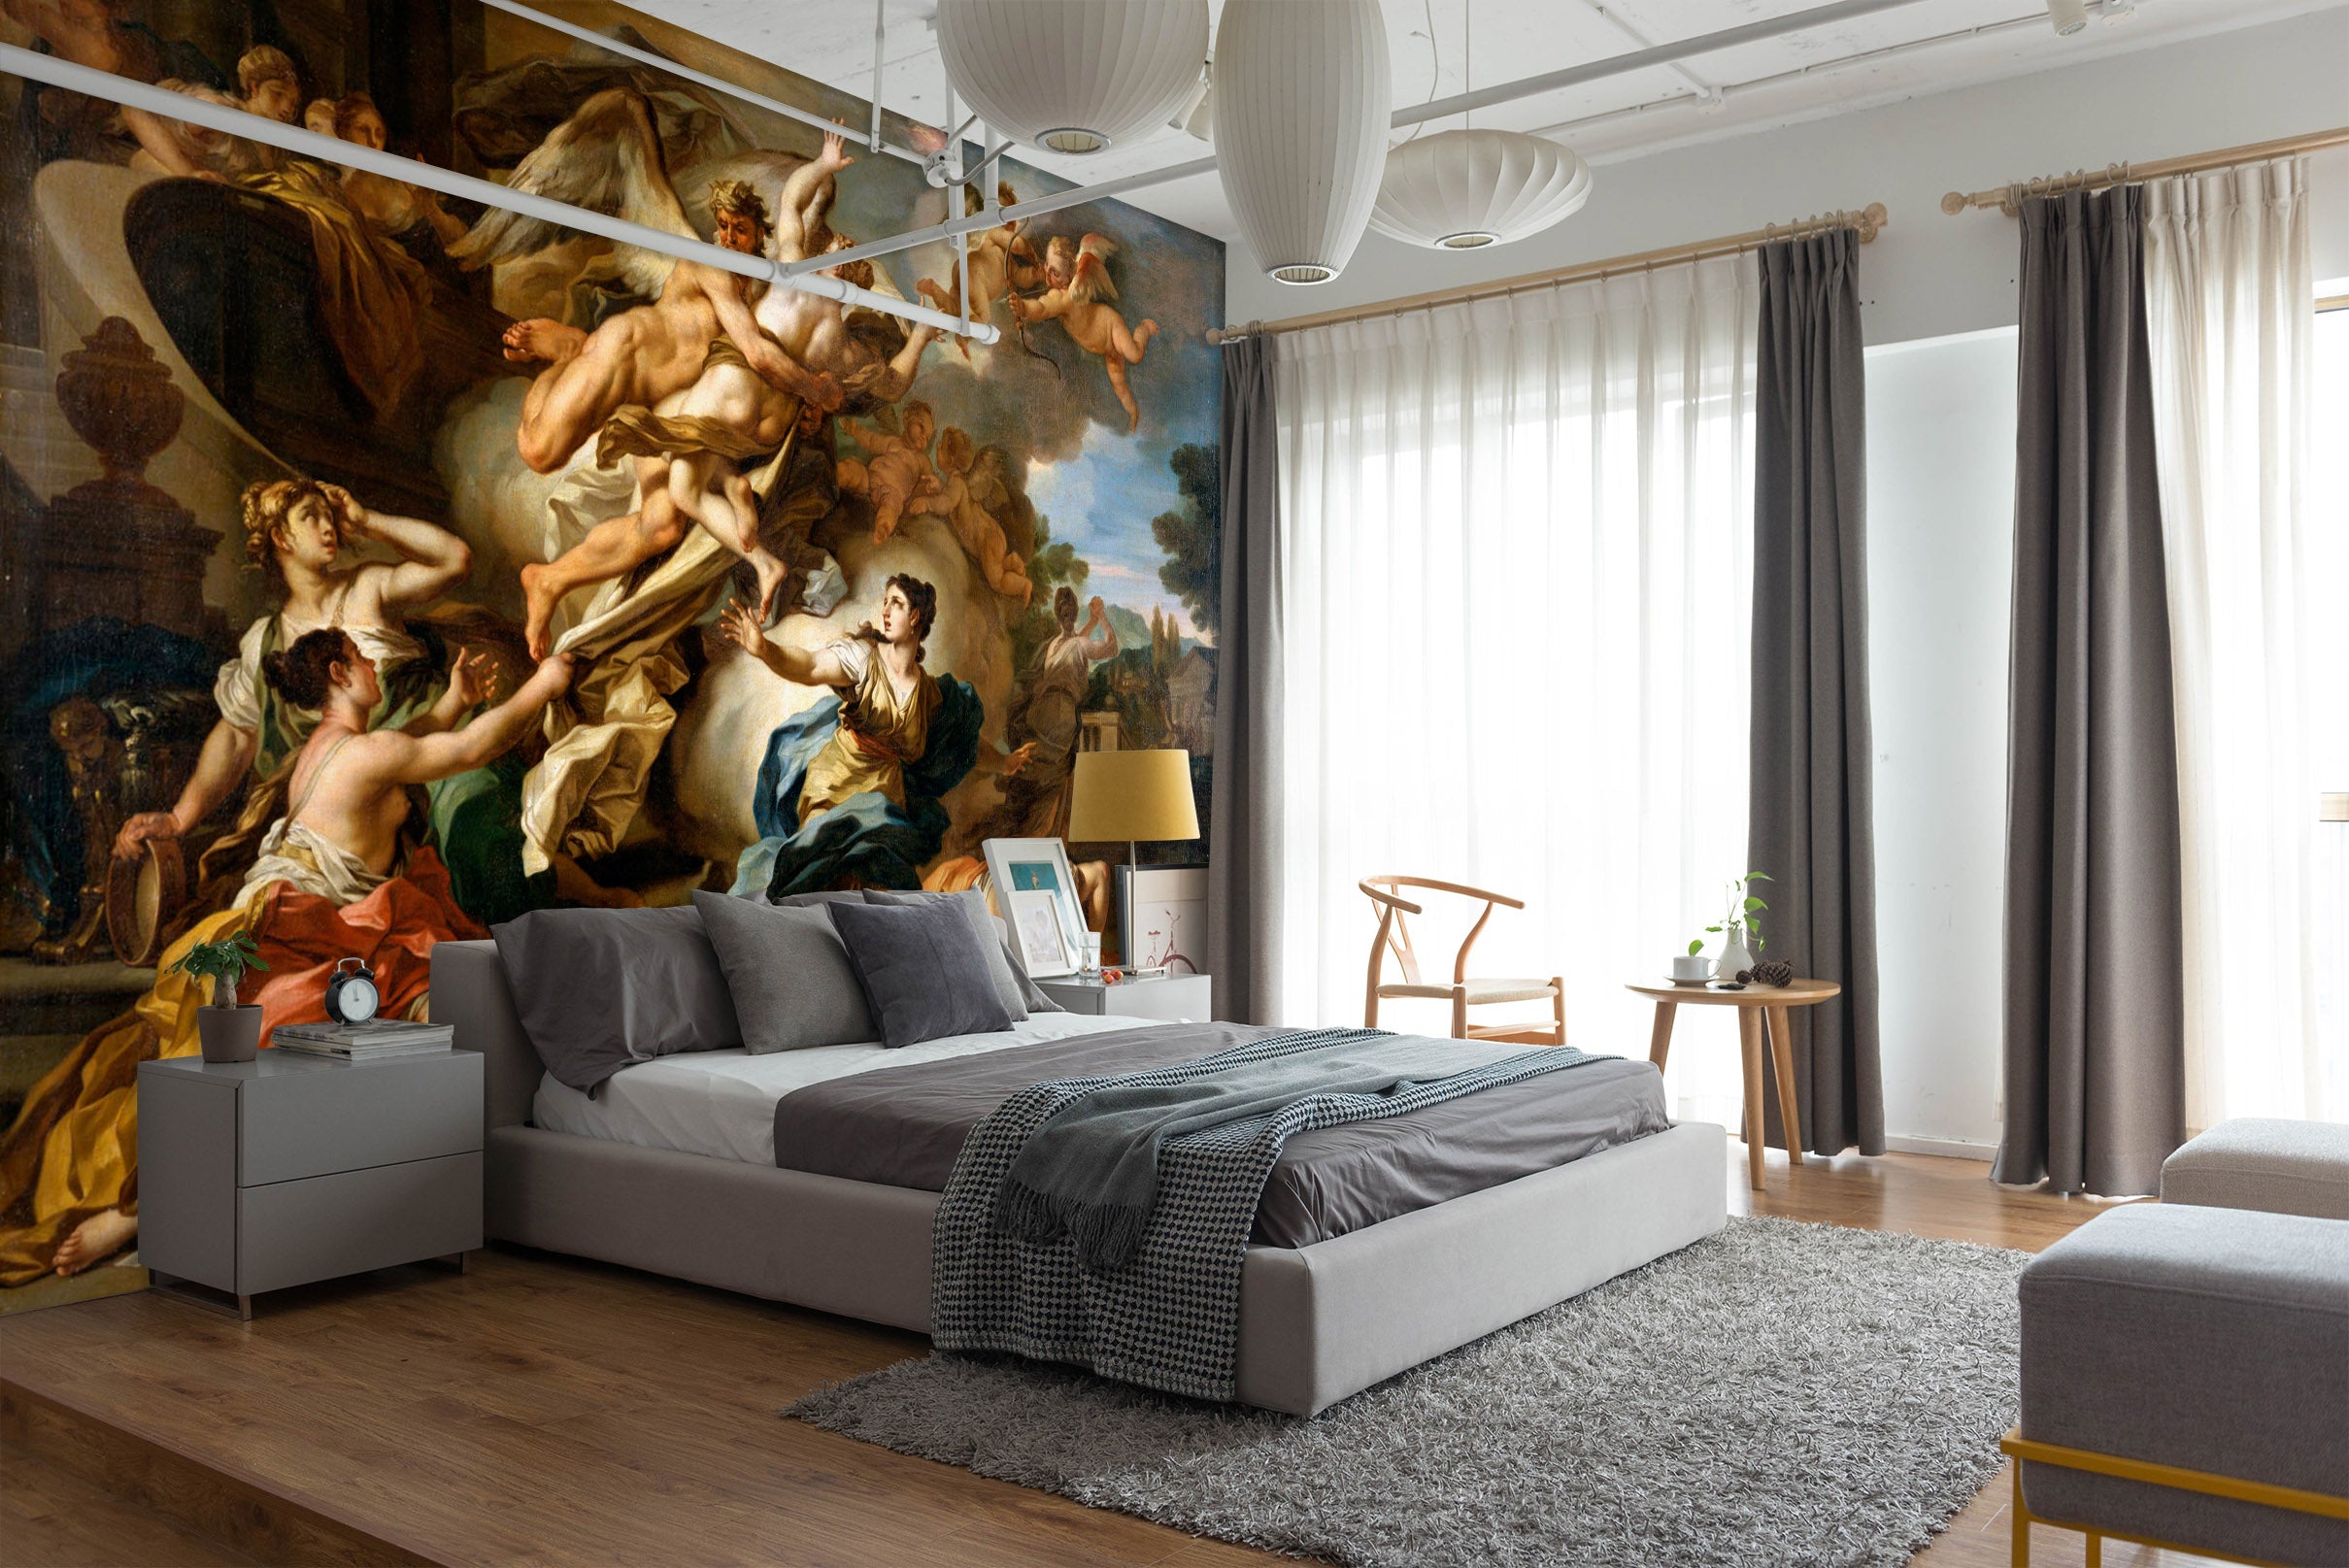 3D Religious Oil Painting 1760 Wall Murals